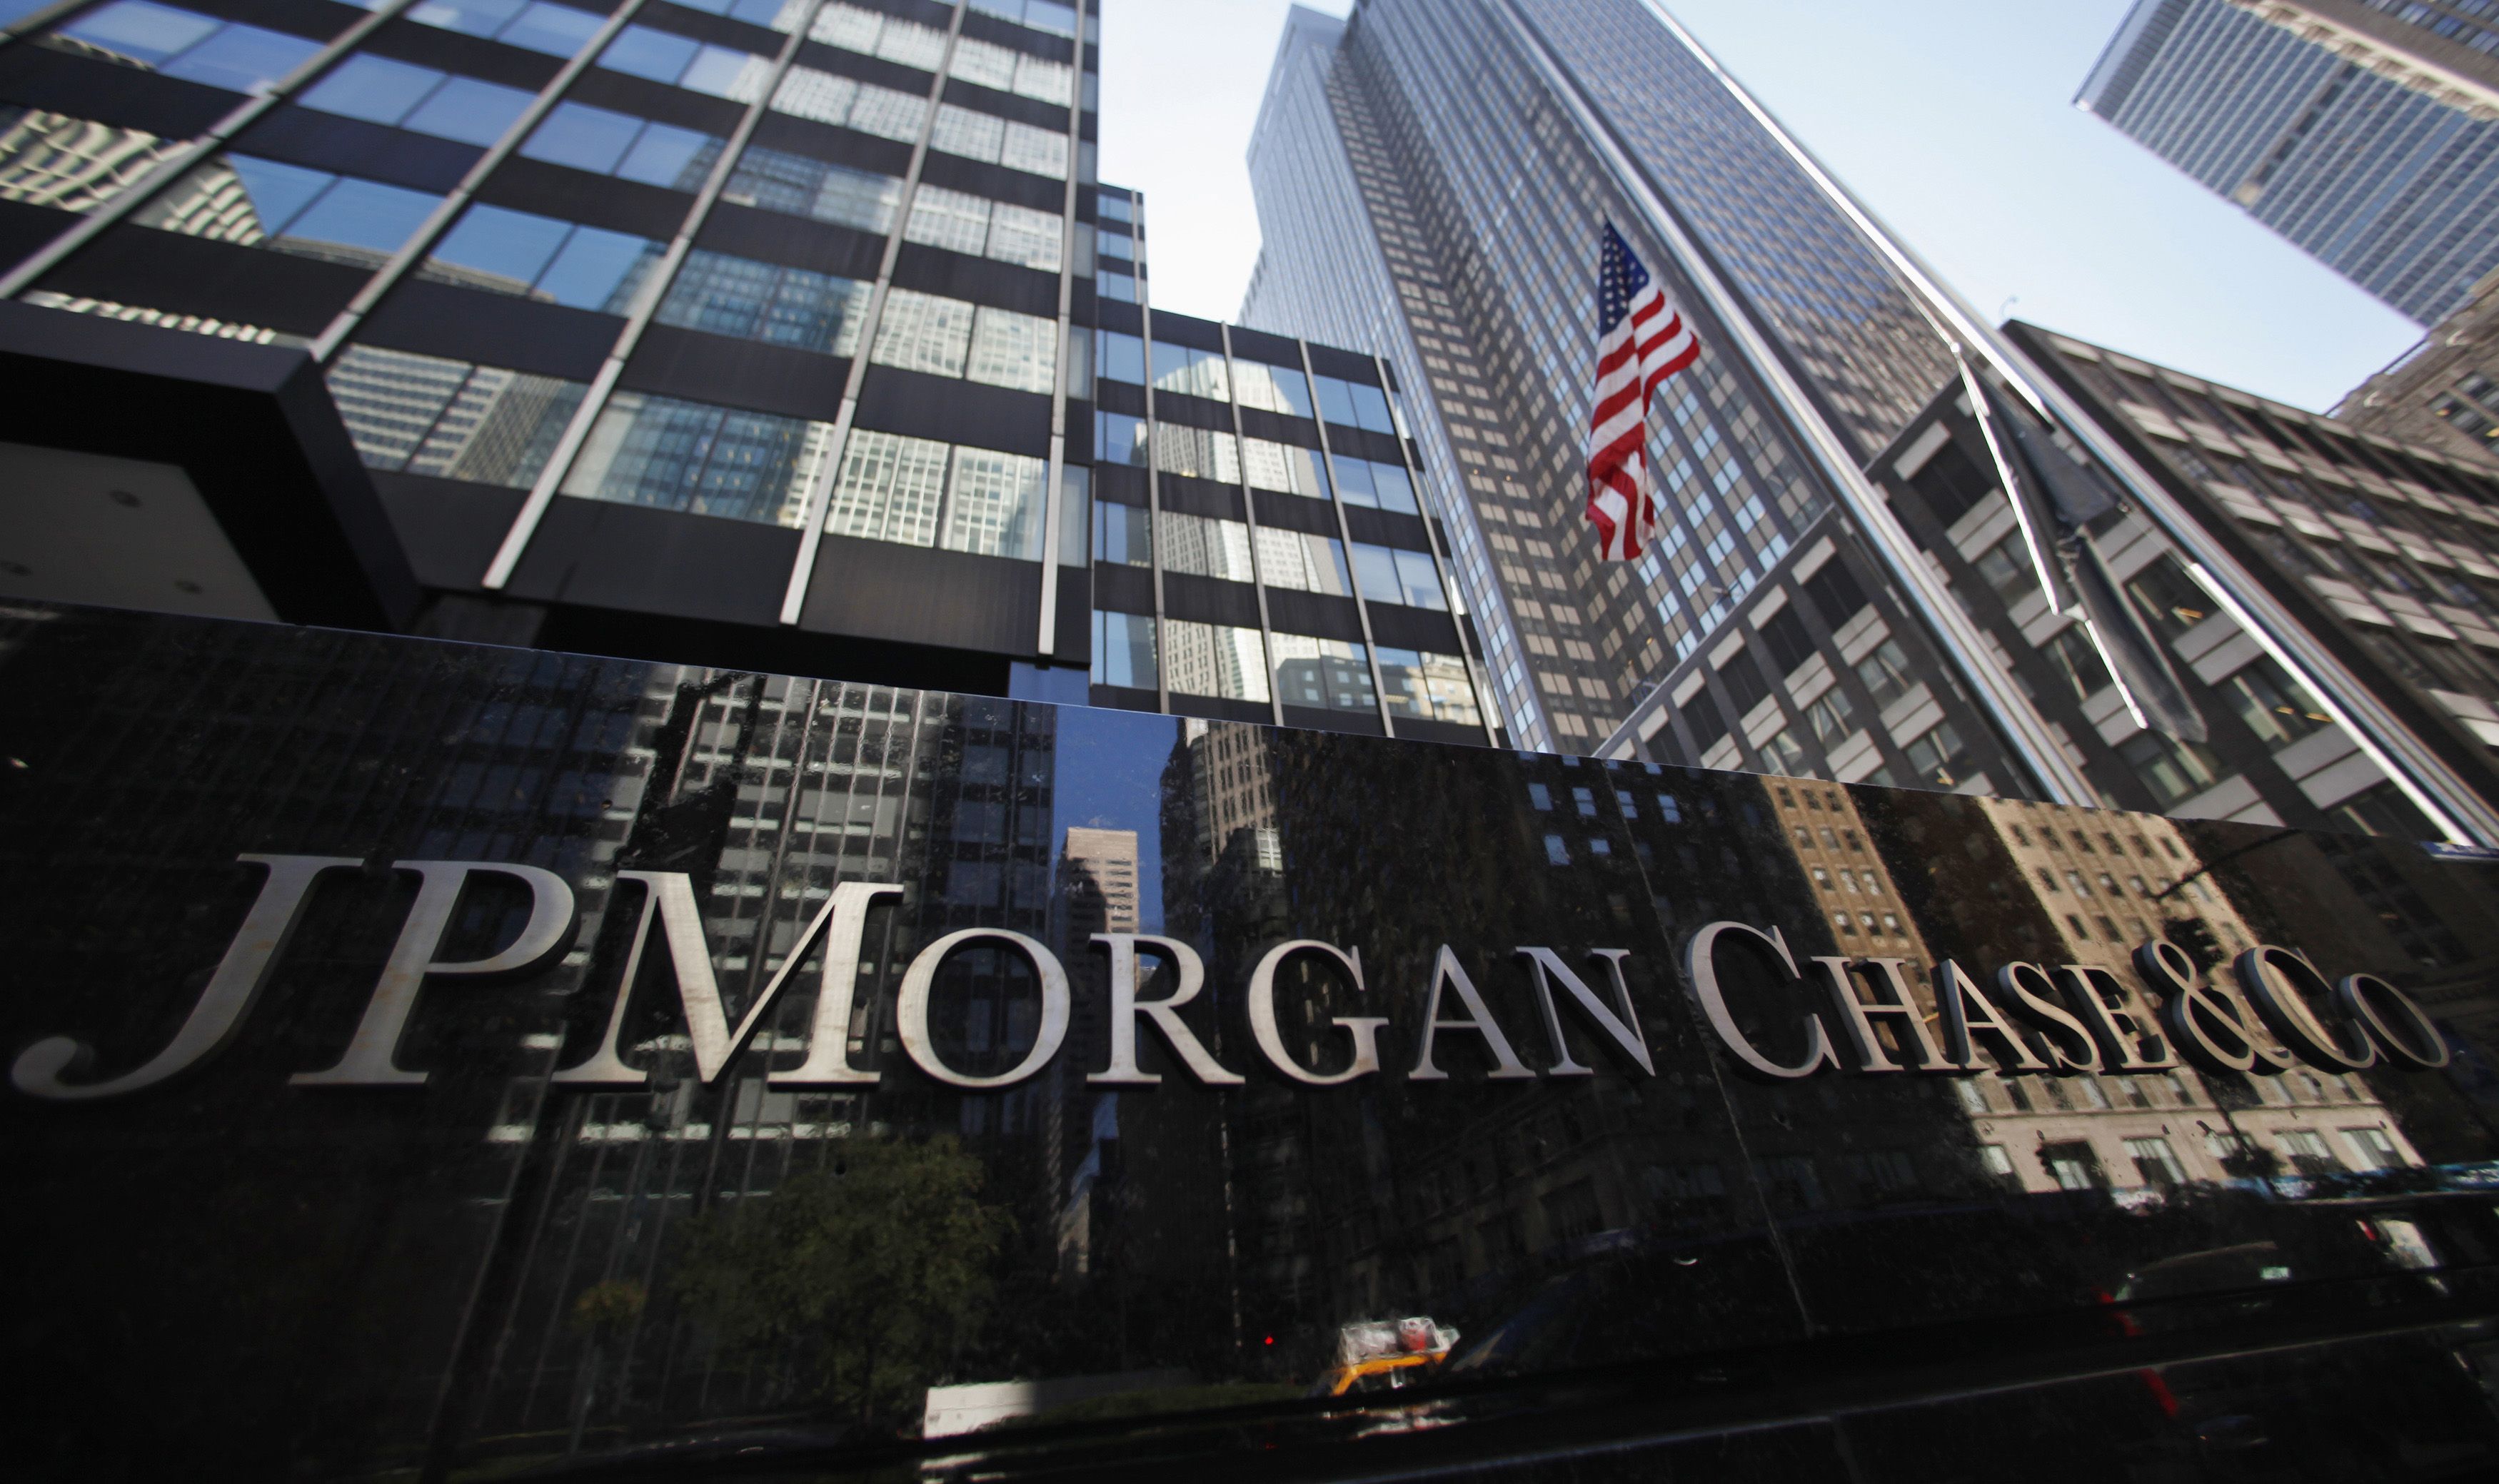 J.P Morgan Sees Crypto As ‘Competition’ And ‘Risk’ To Its Business In SEC Annual Report